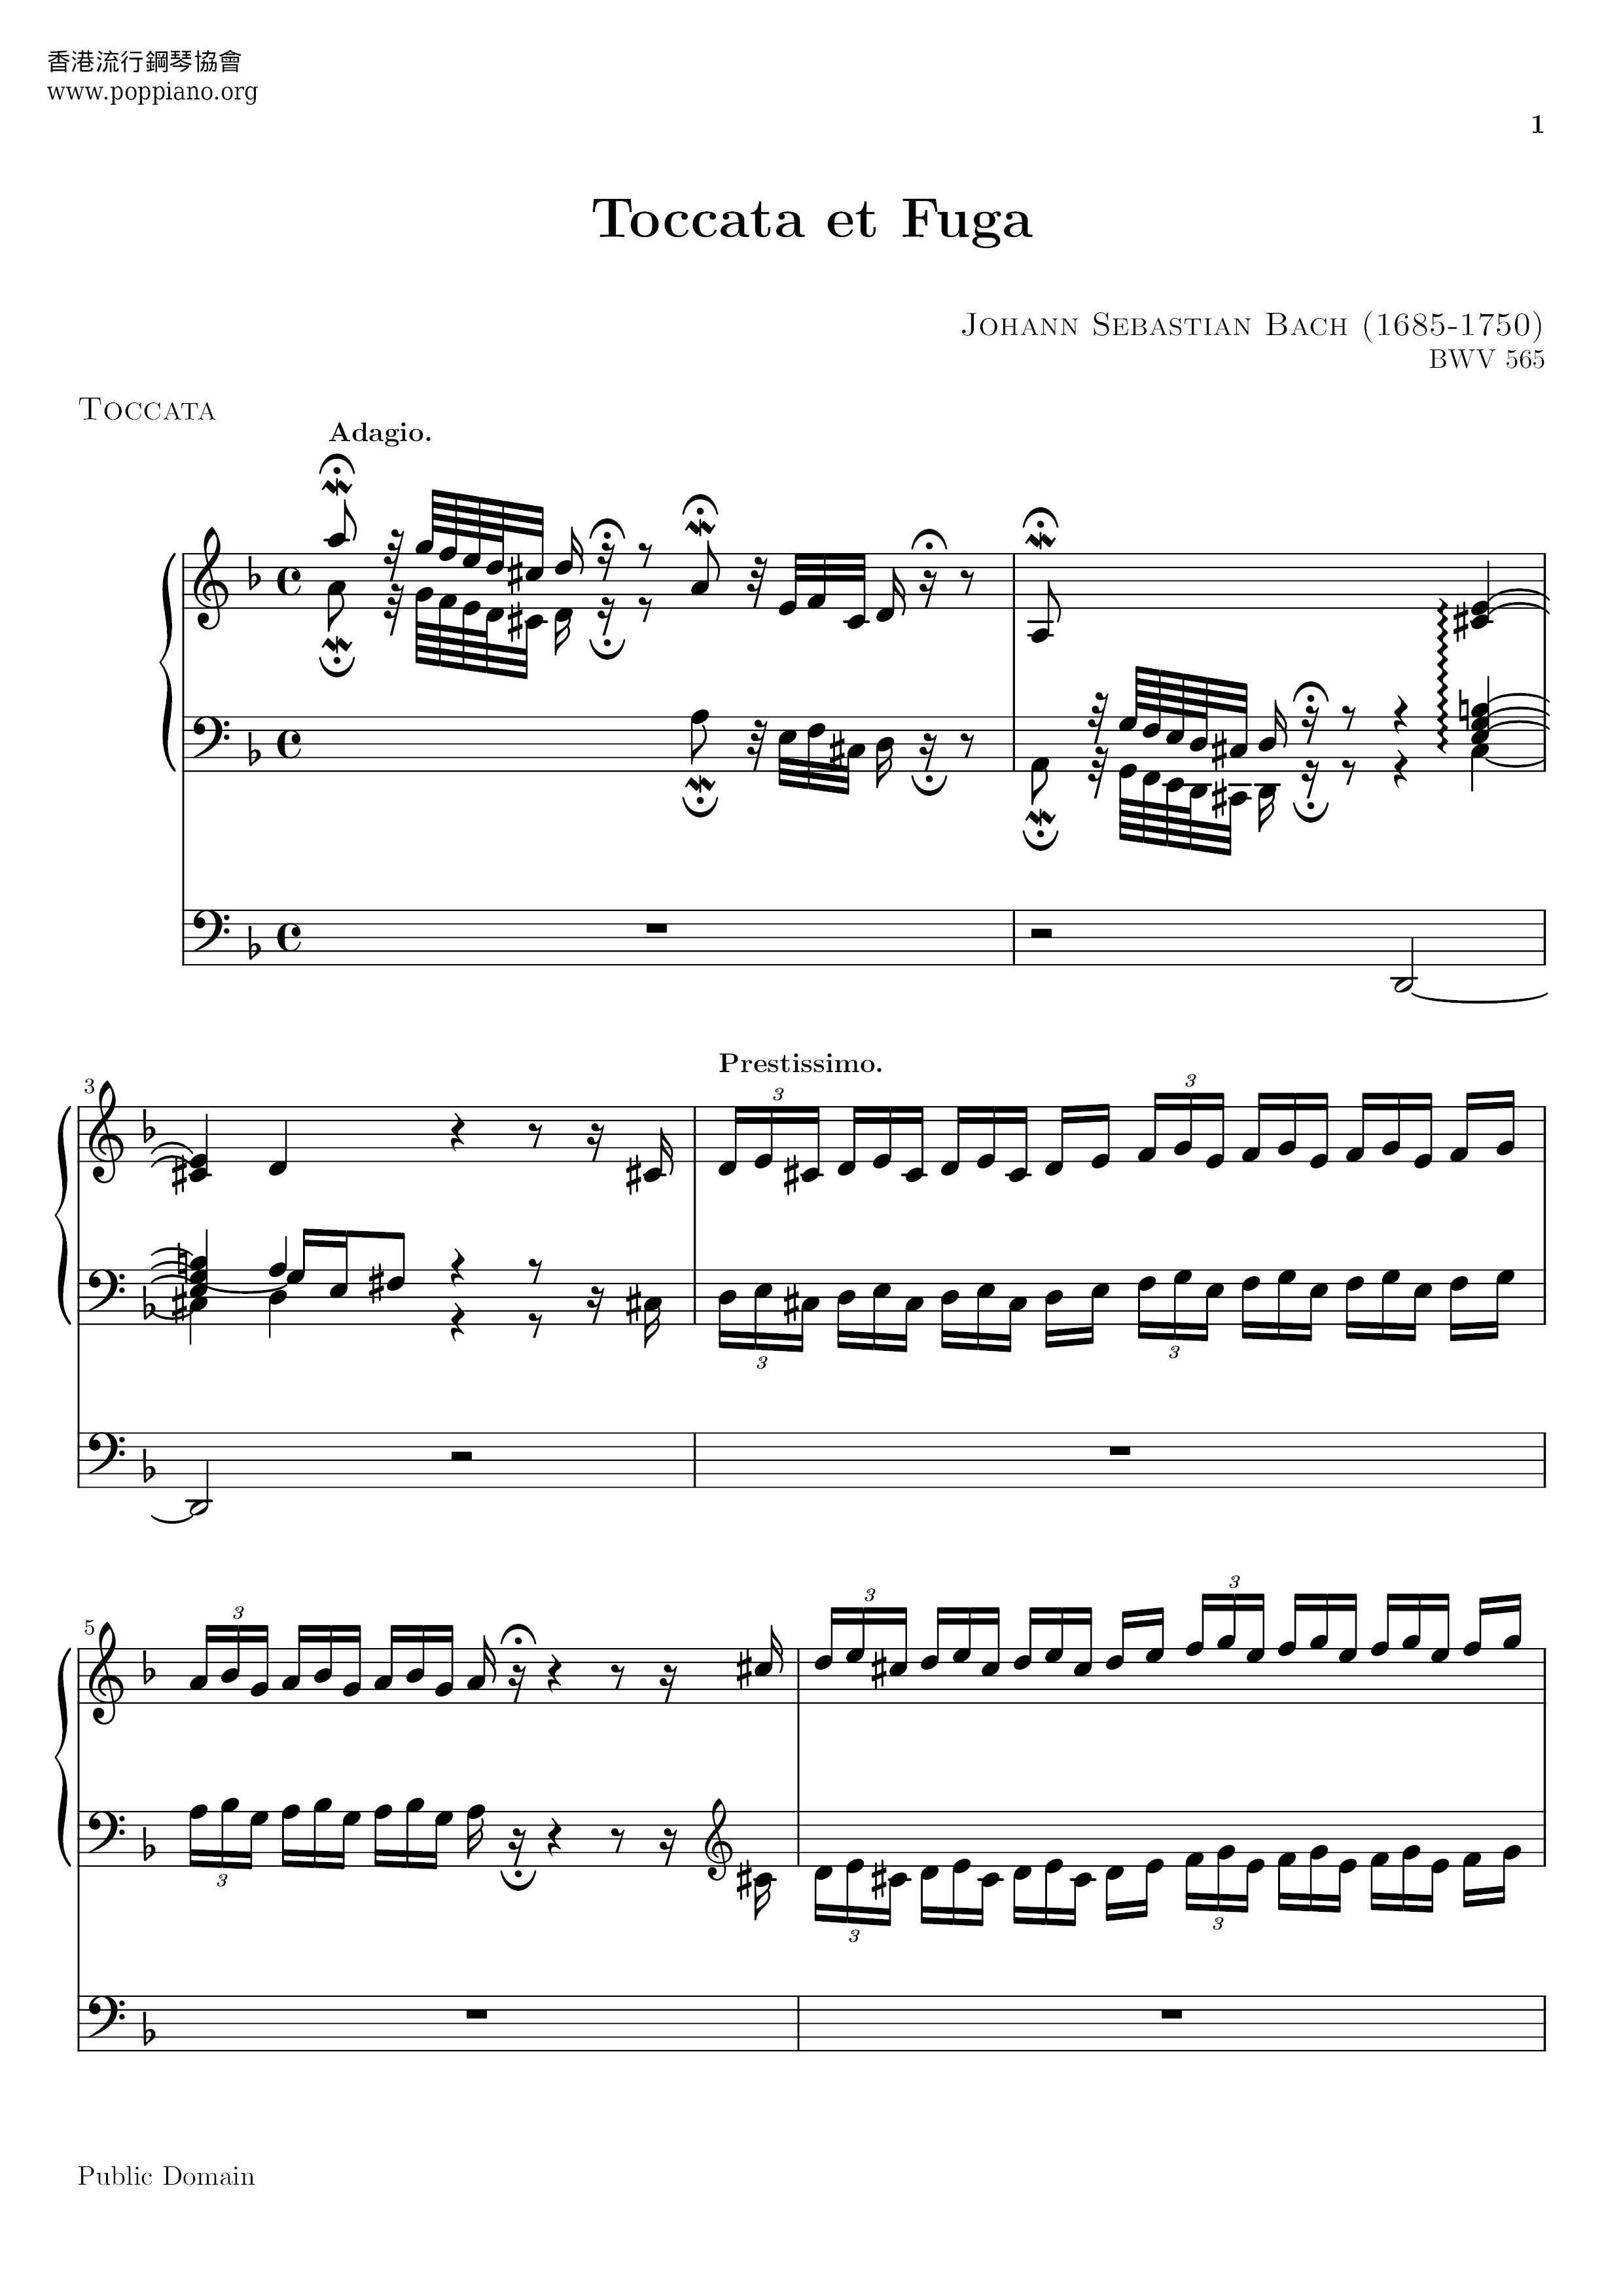 Toccata and Fugue in D minor, BWV 565ピアノ譜